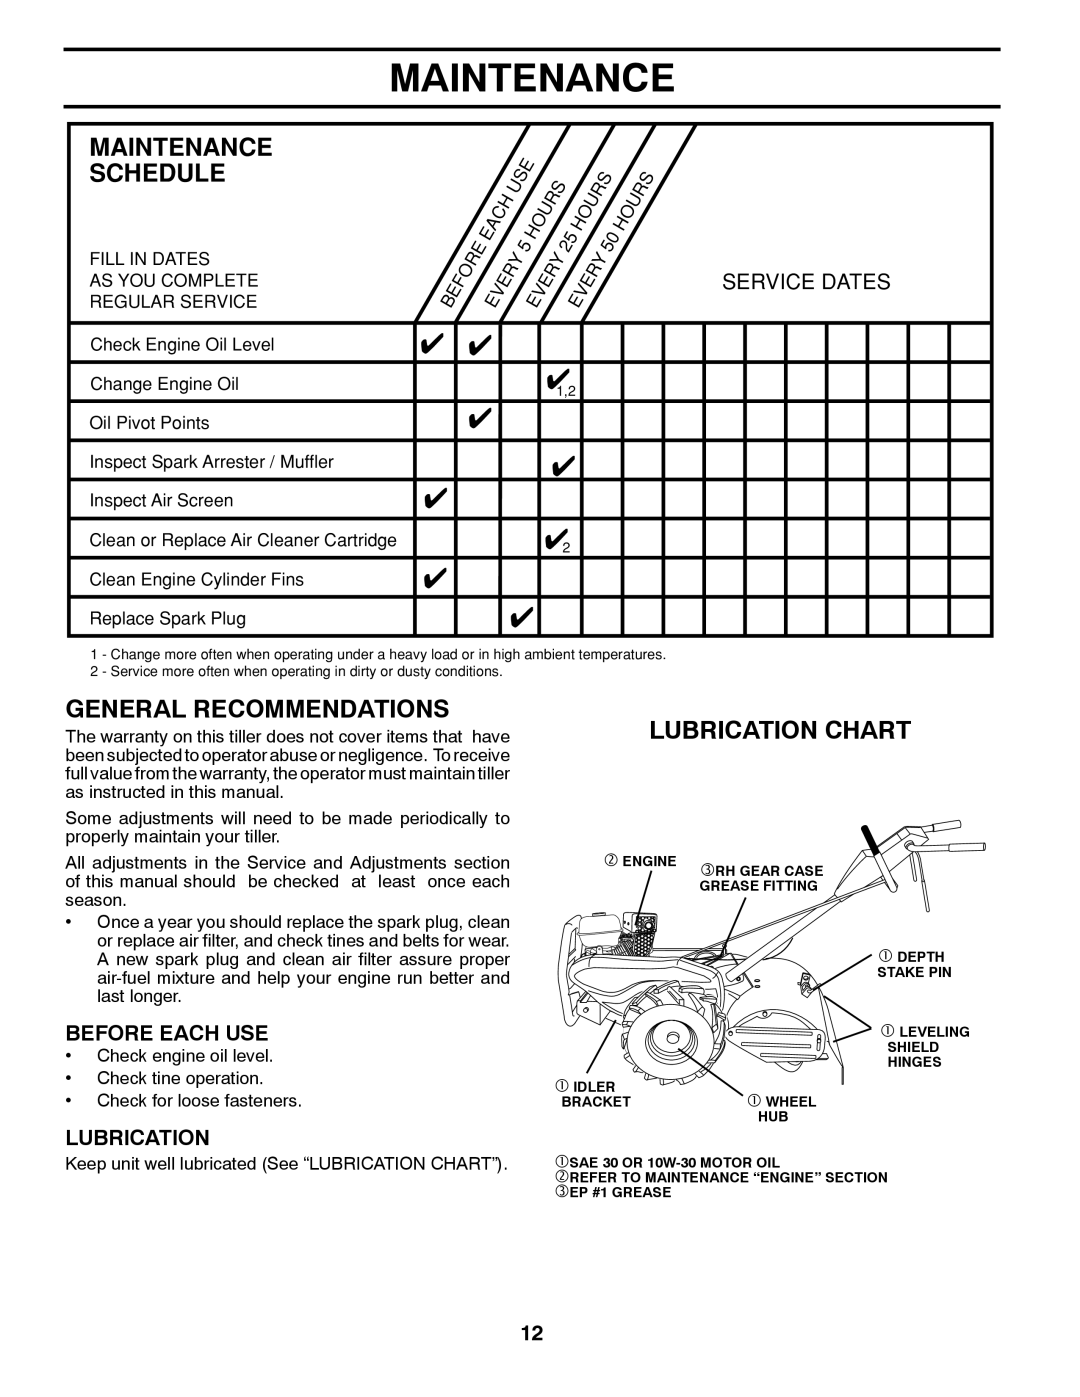 Poulan 423813 manual Maintenance, 4%.!.#%3#%$5,%, General Recommendations, Lubrication Chart, 3%26#%ª$!4%3, Before Each Use 